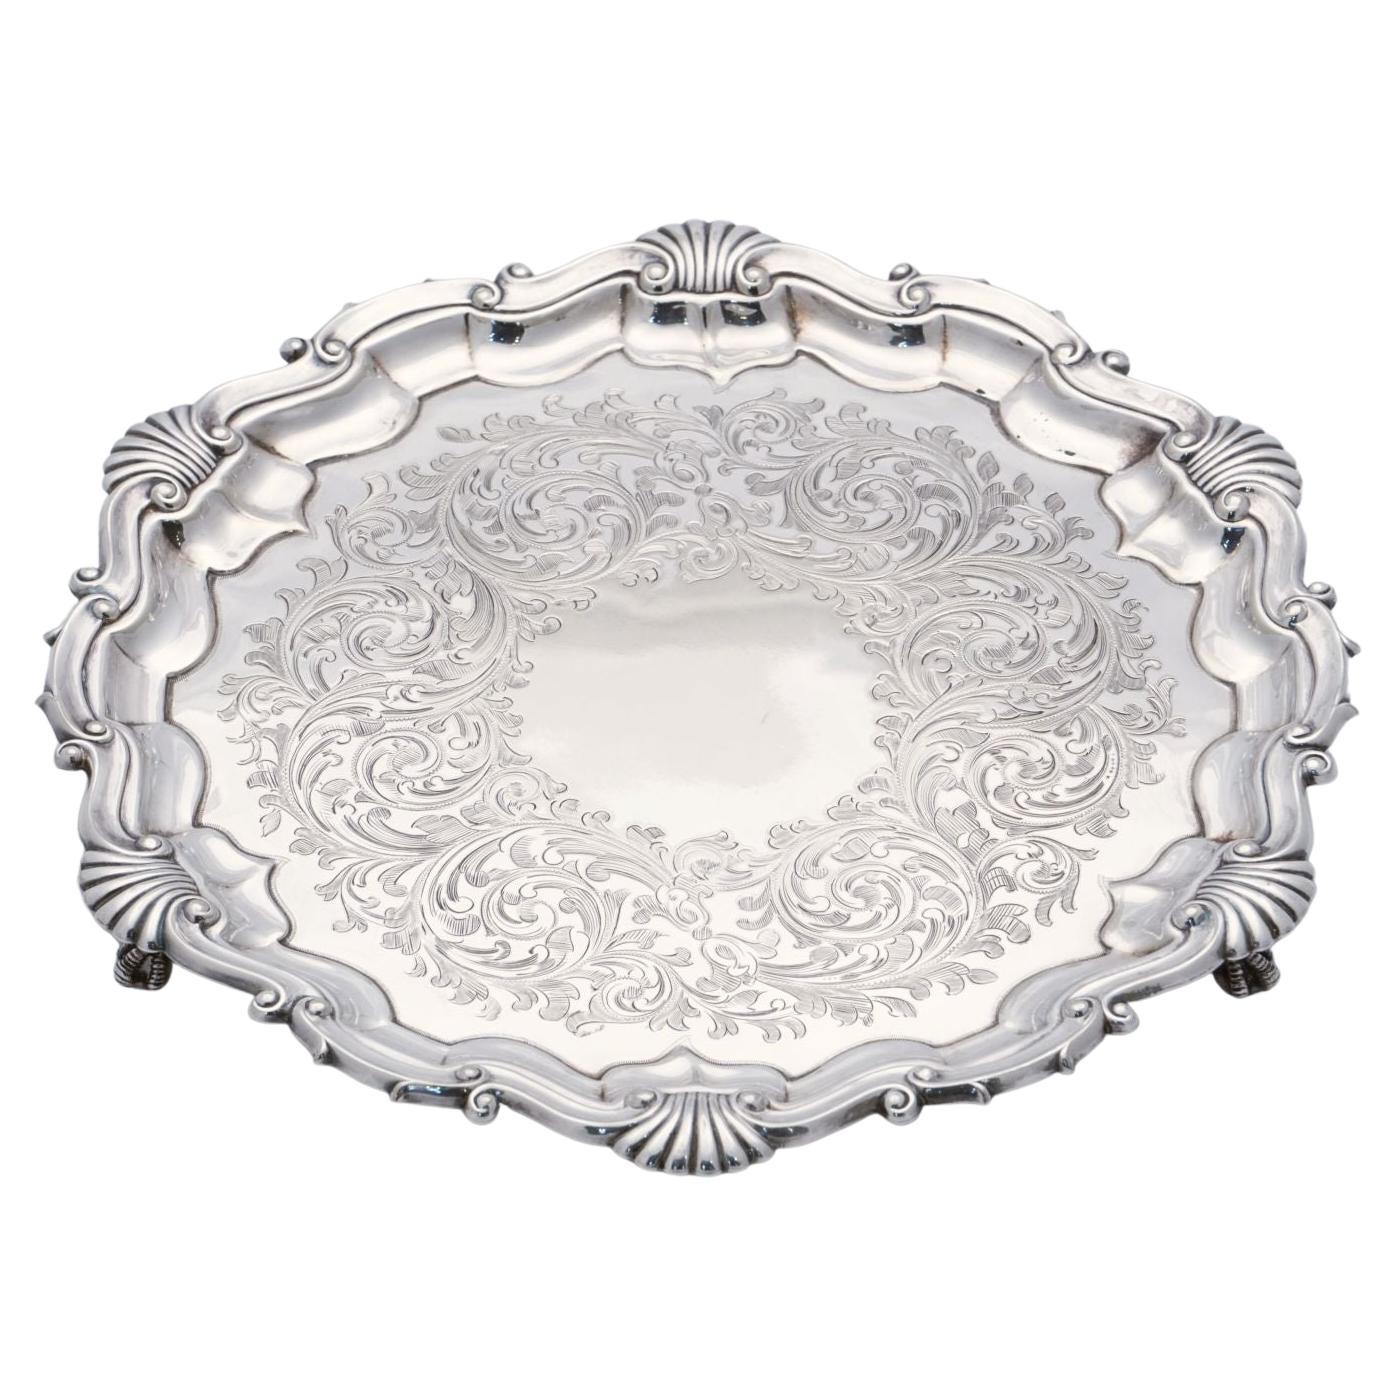 A handsome English round salver or serving or drinks tray of fine plate silver, in the Chippendale style, featuring a pattern of sea shells around the circumference, with an etched scrollwork design in the center.

Impressed mark on back